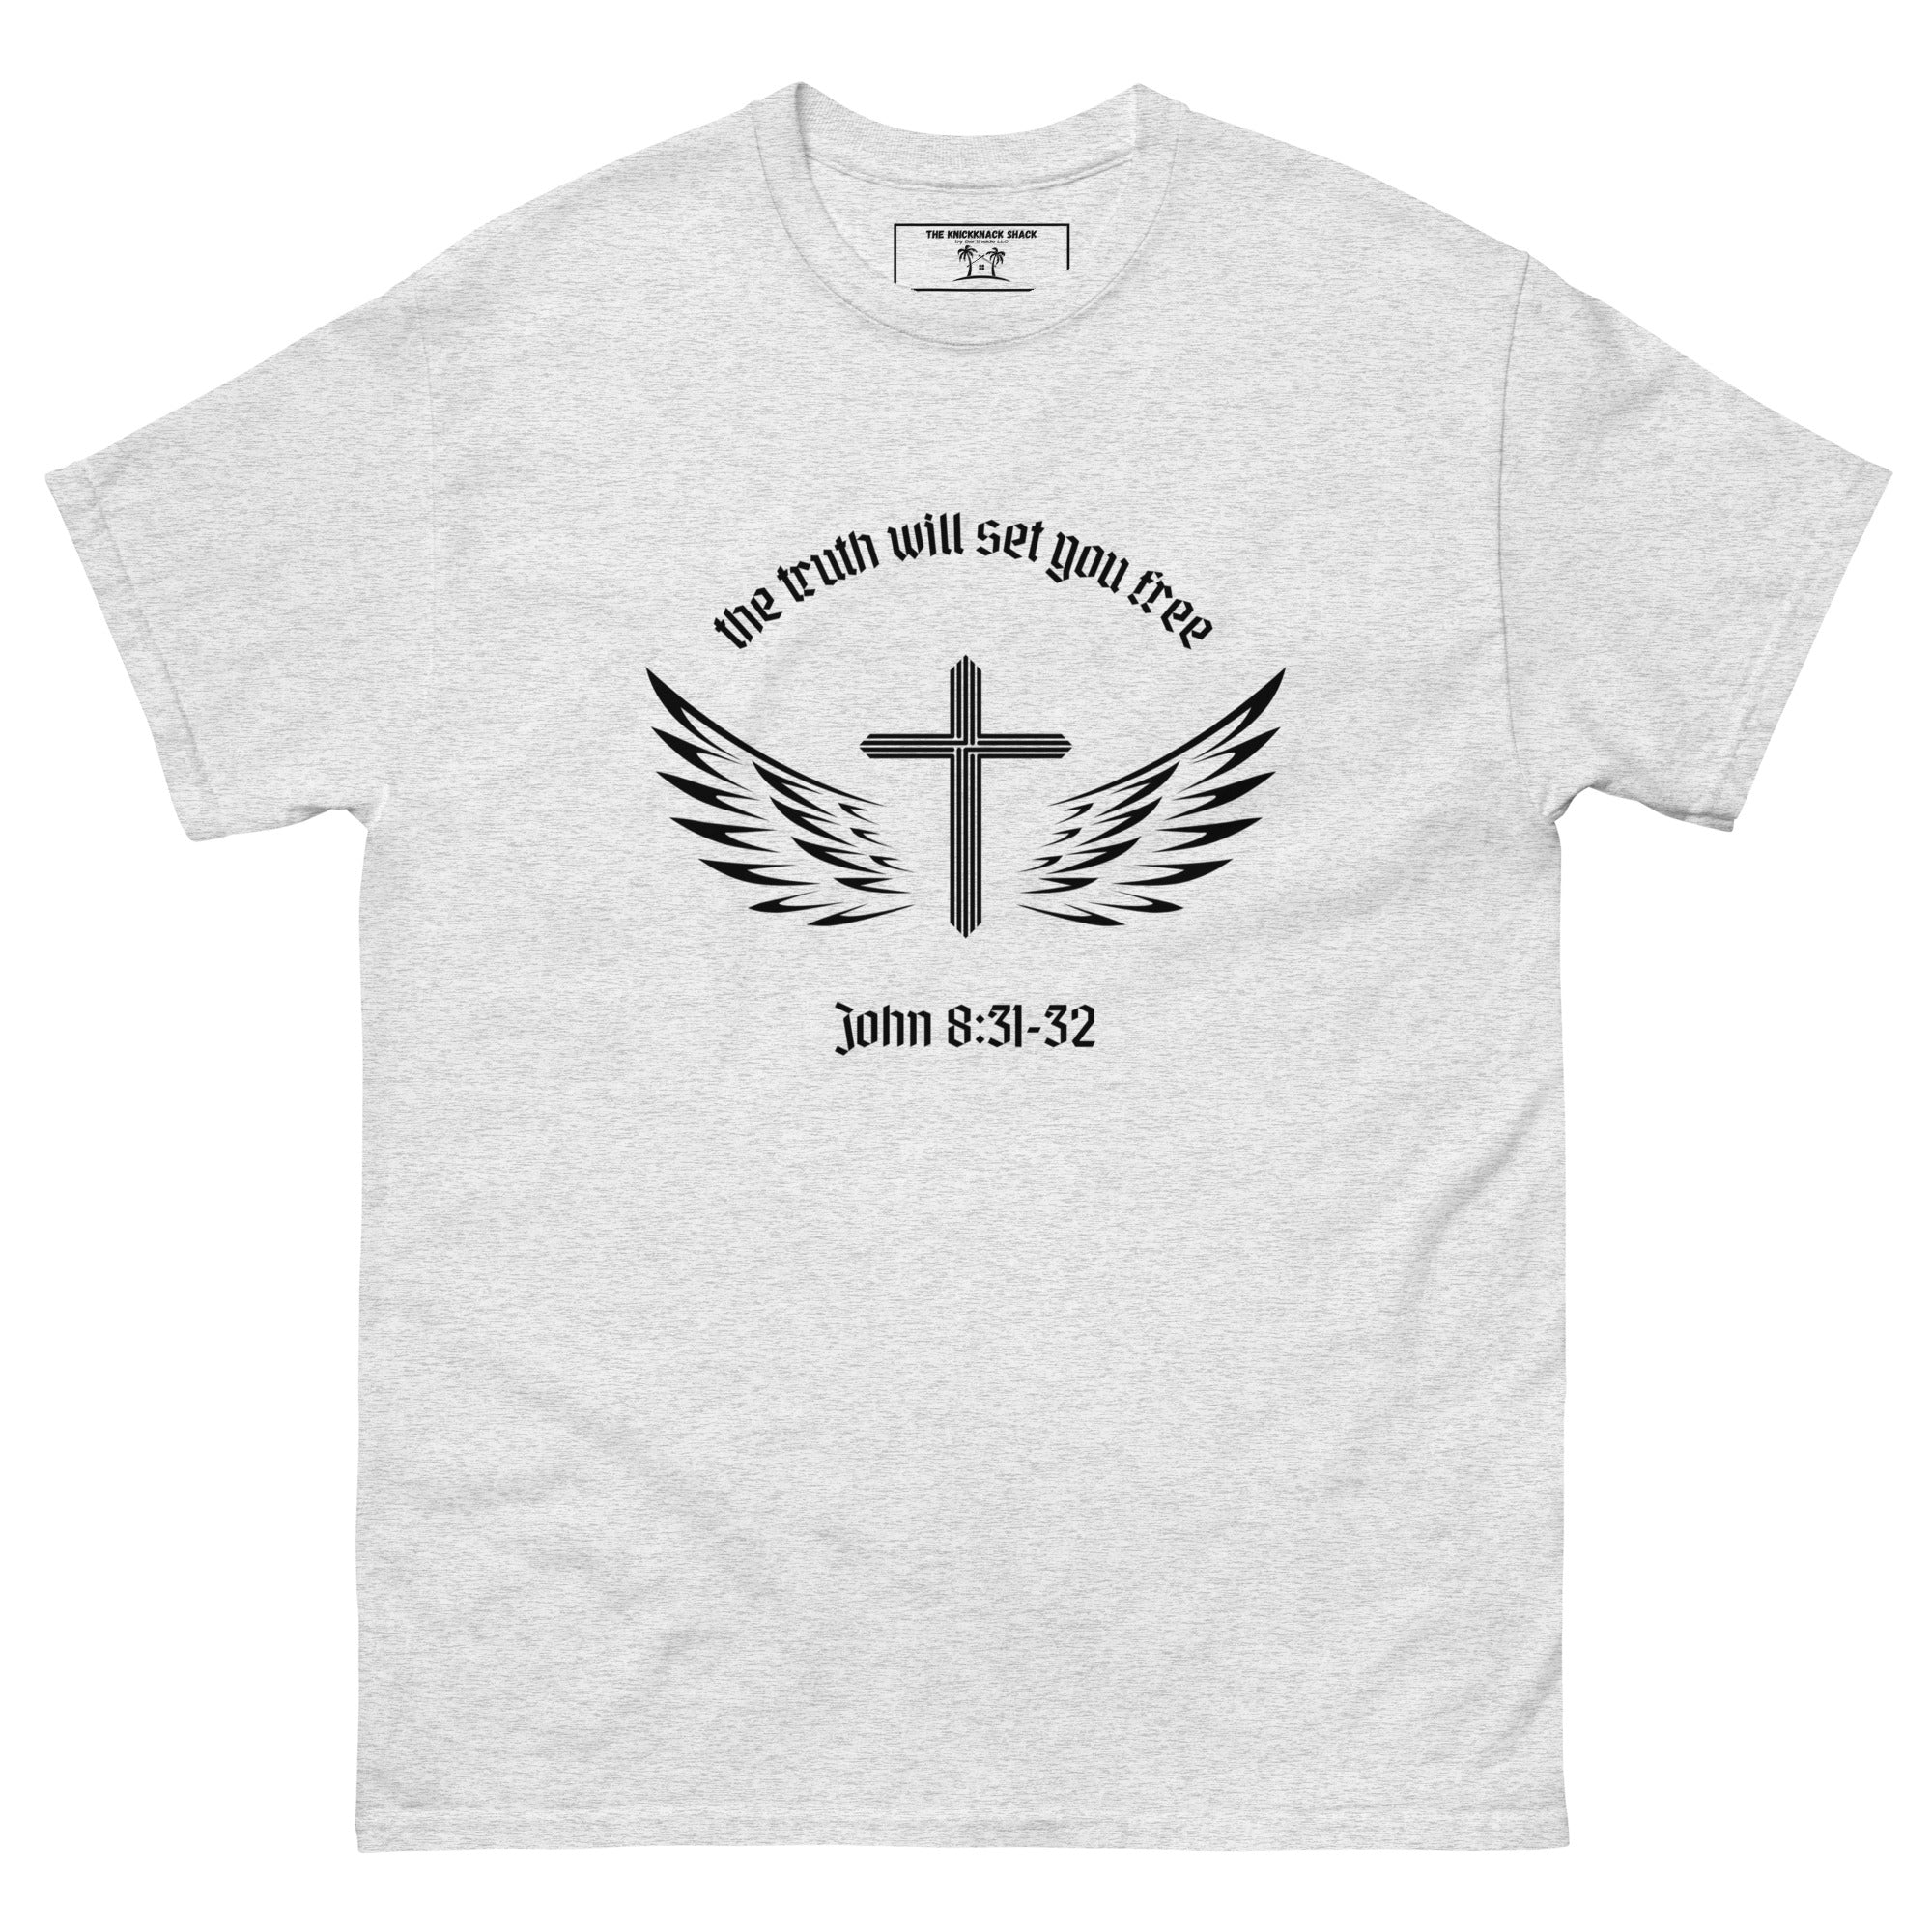 Classic Tee - The Truth Will Set You Free (Light Colors)